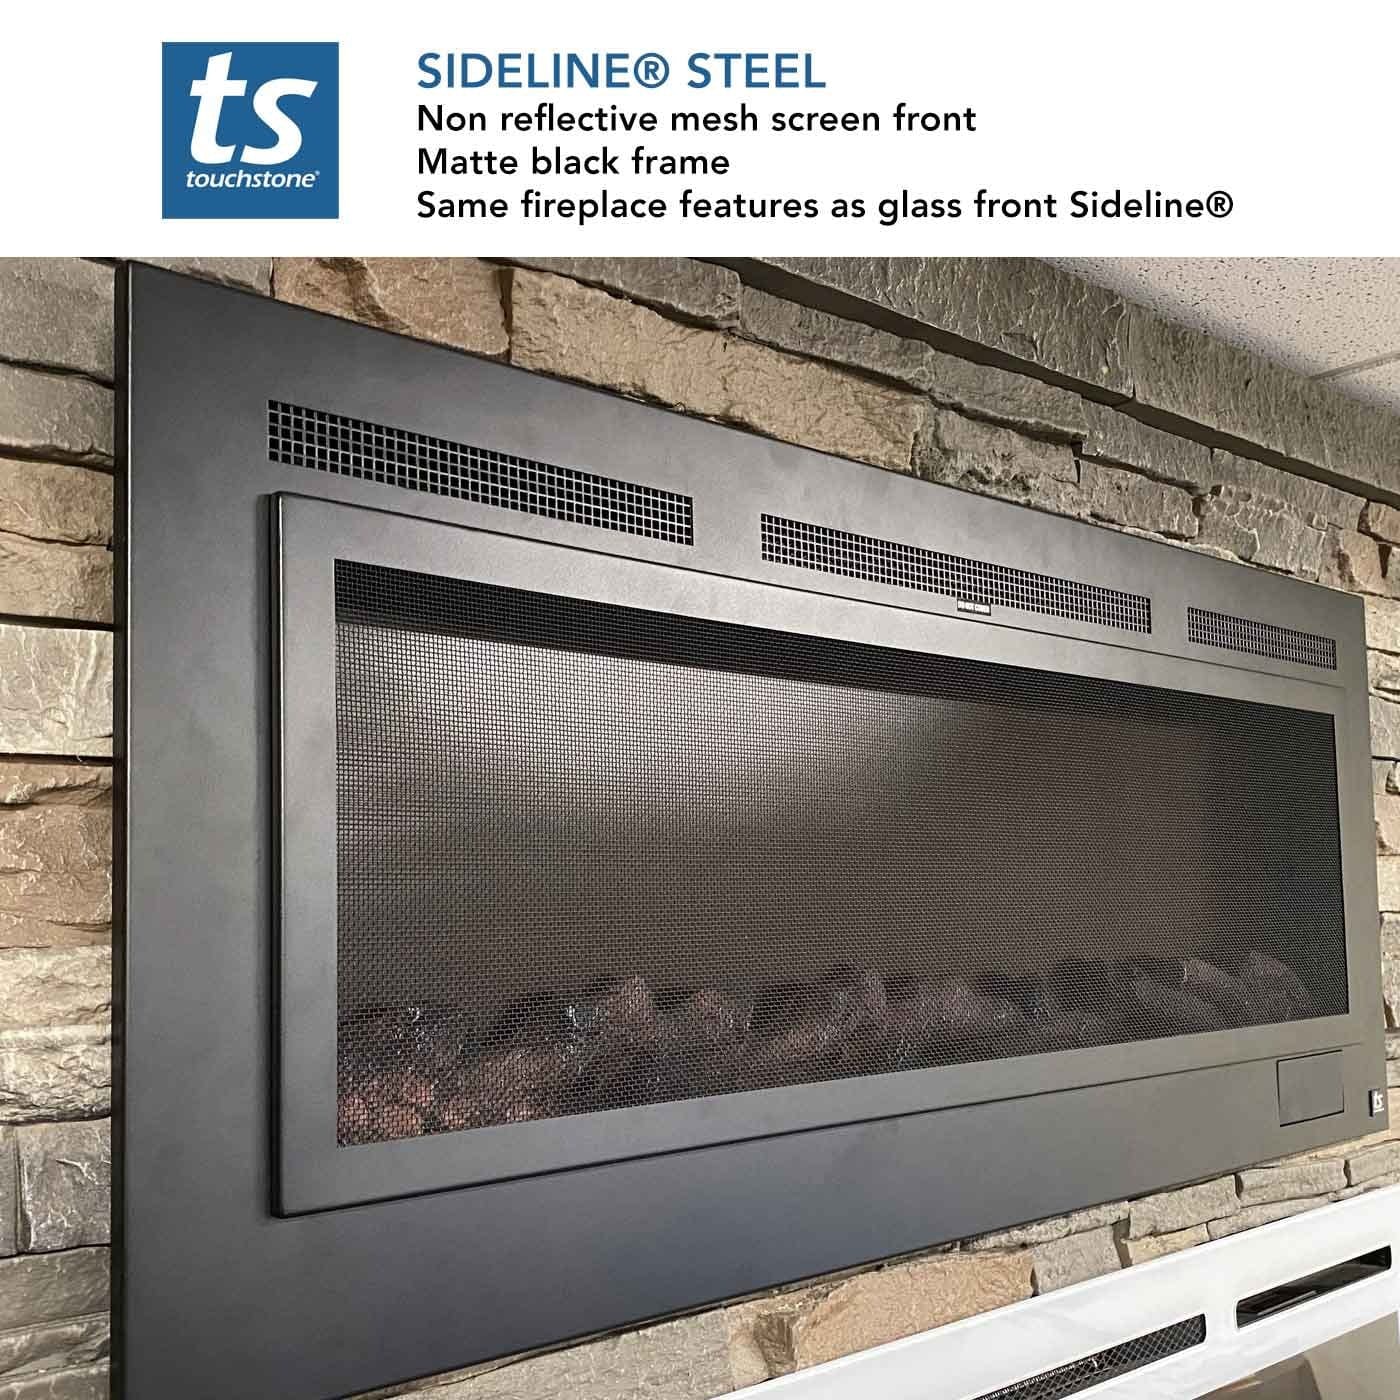 The Sideline Steel Mesh Screen Non Reflective 60" Recessed Electric Fireplace - Matte Black